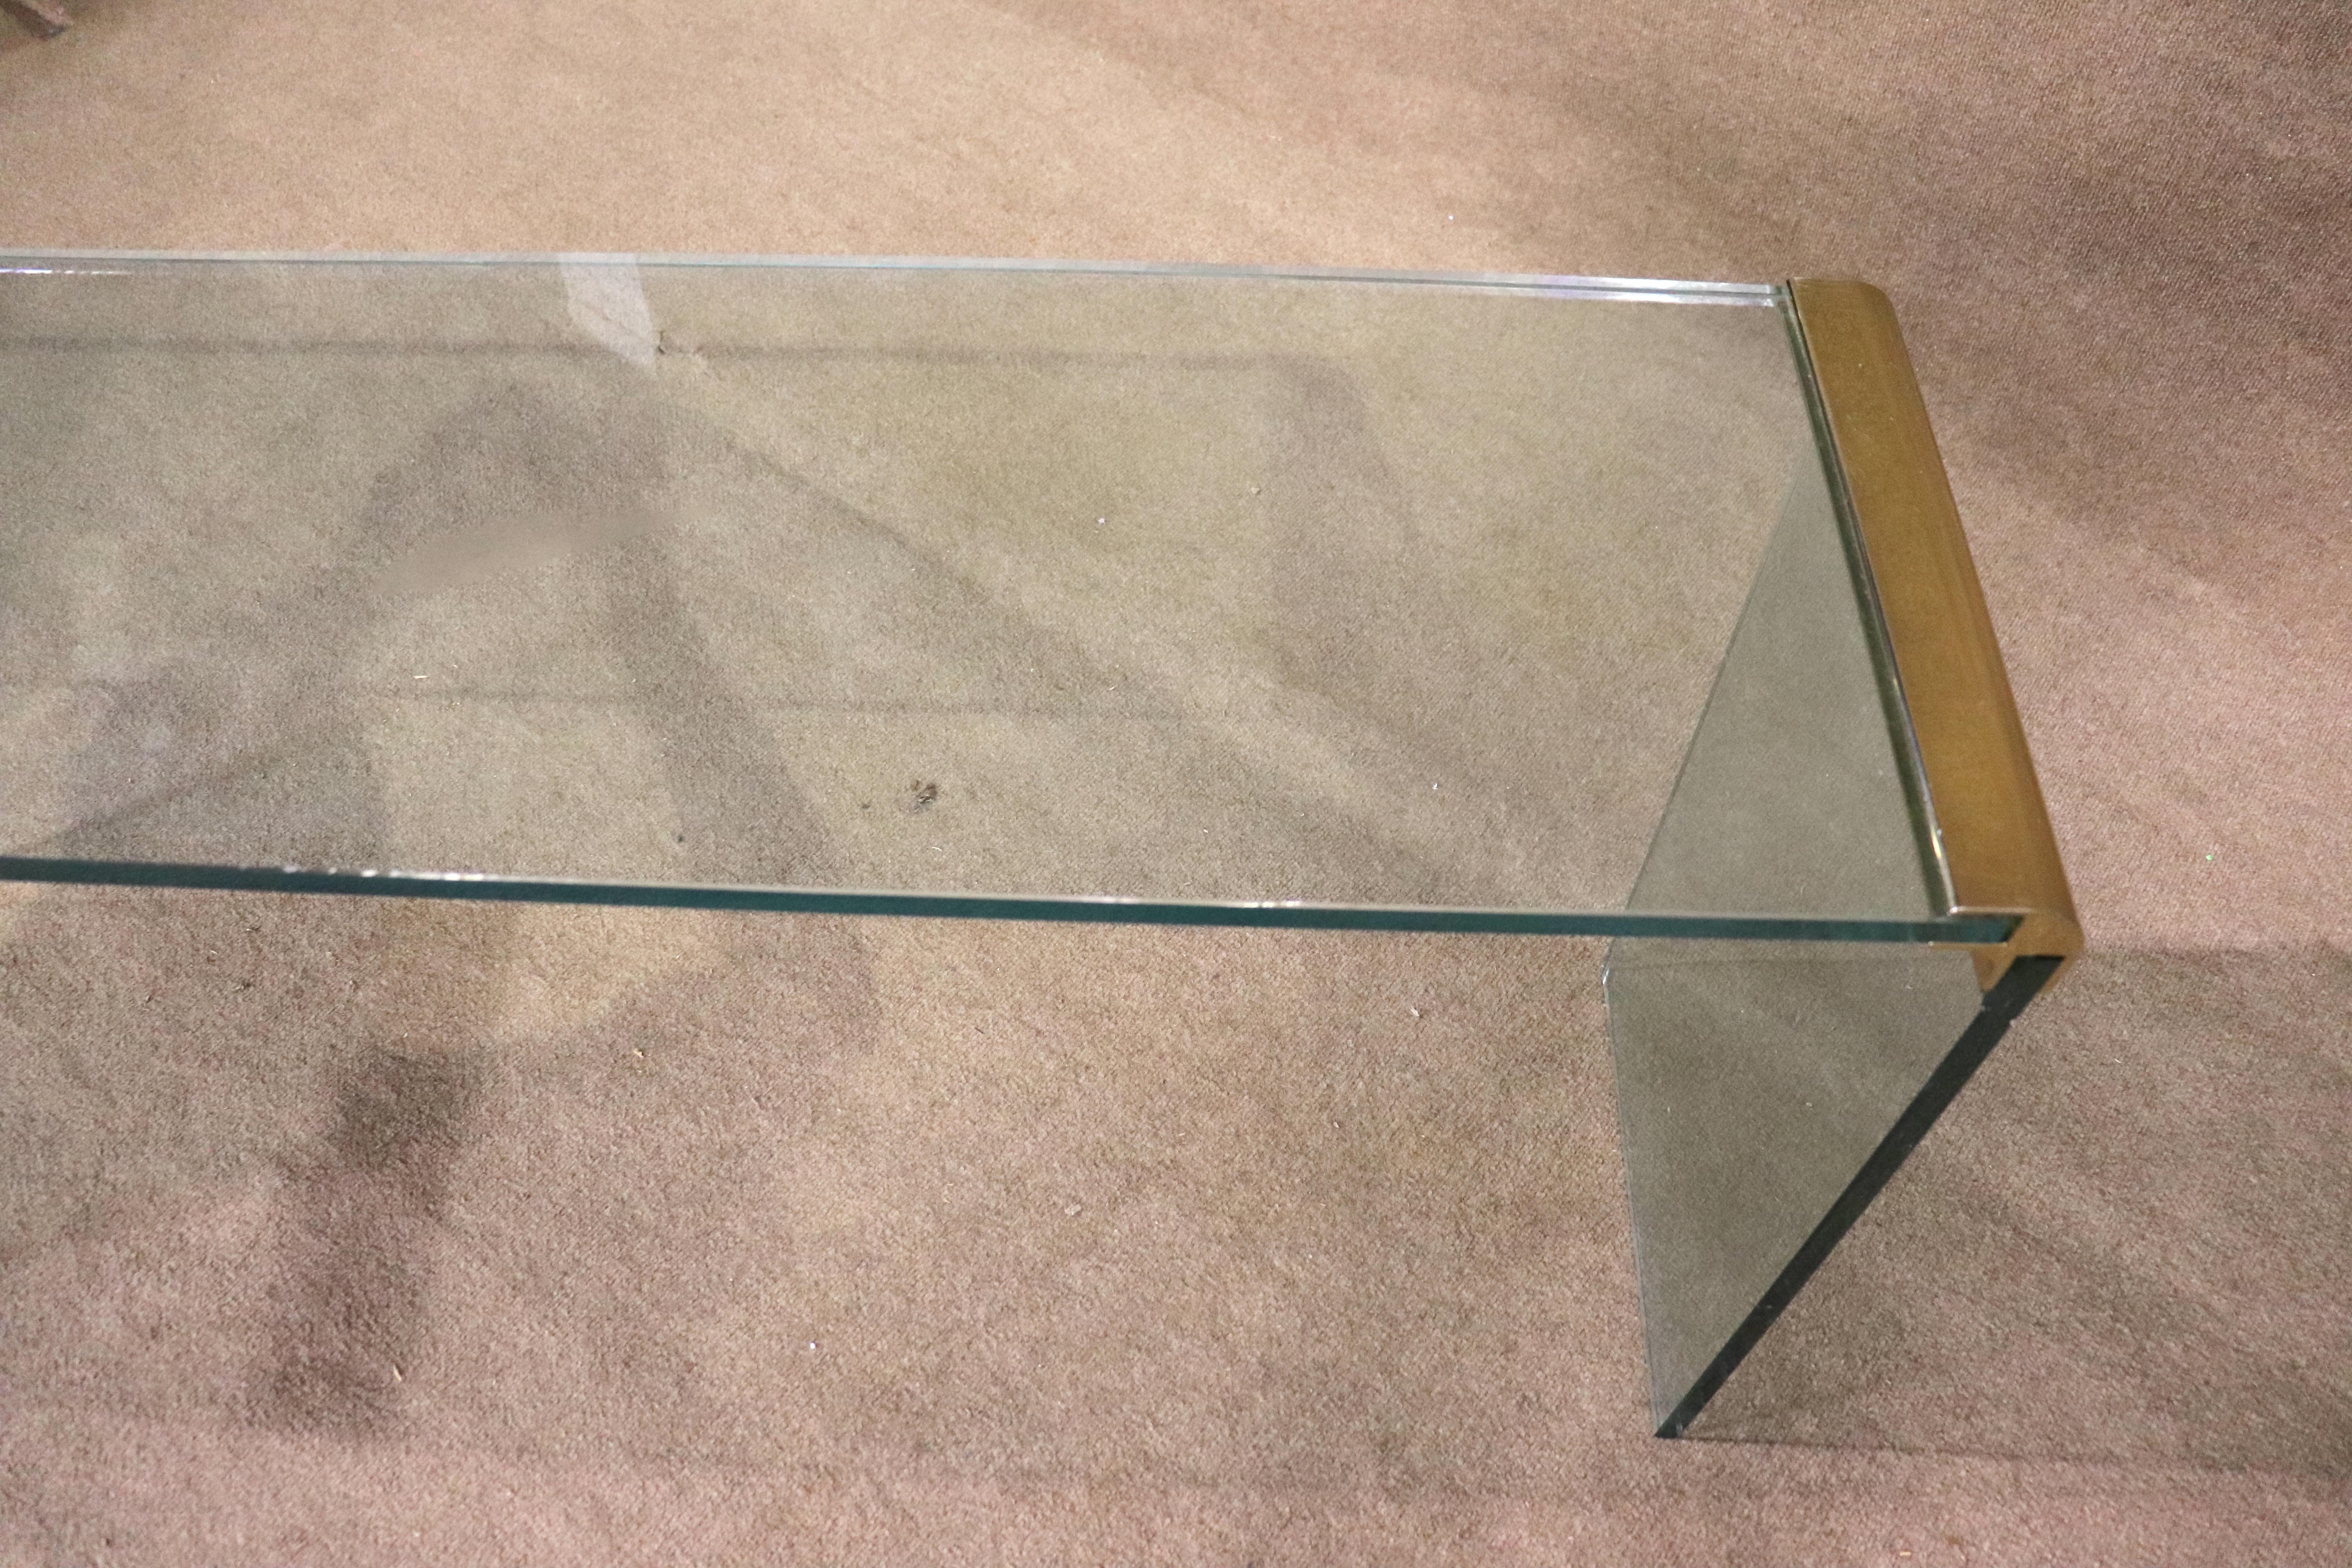 Clear glass console table by Pace, and designed by Leon Rosen. A simple modern design of three glass panes connected by rounded waterfall edges in brass.
Please confirm location NY or NJ